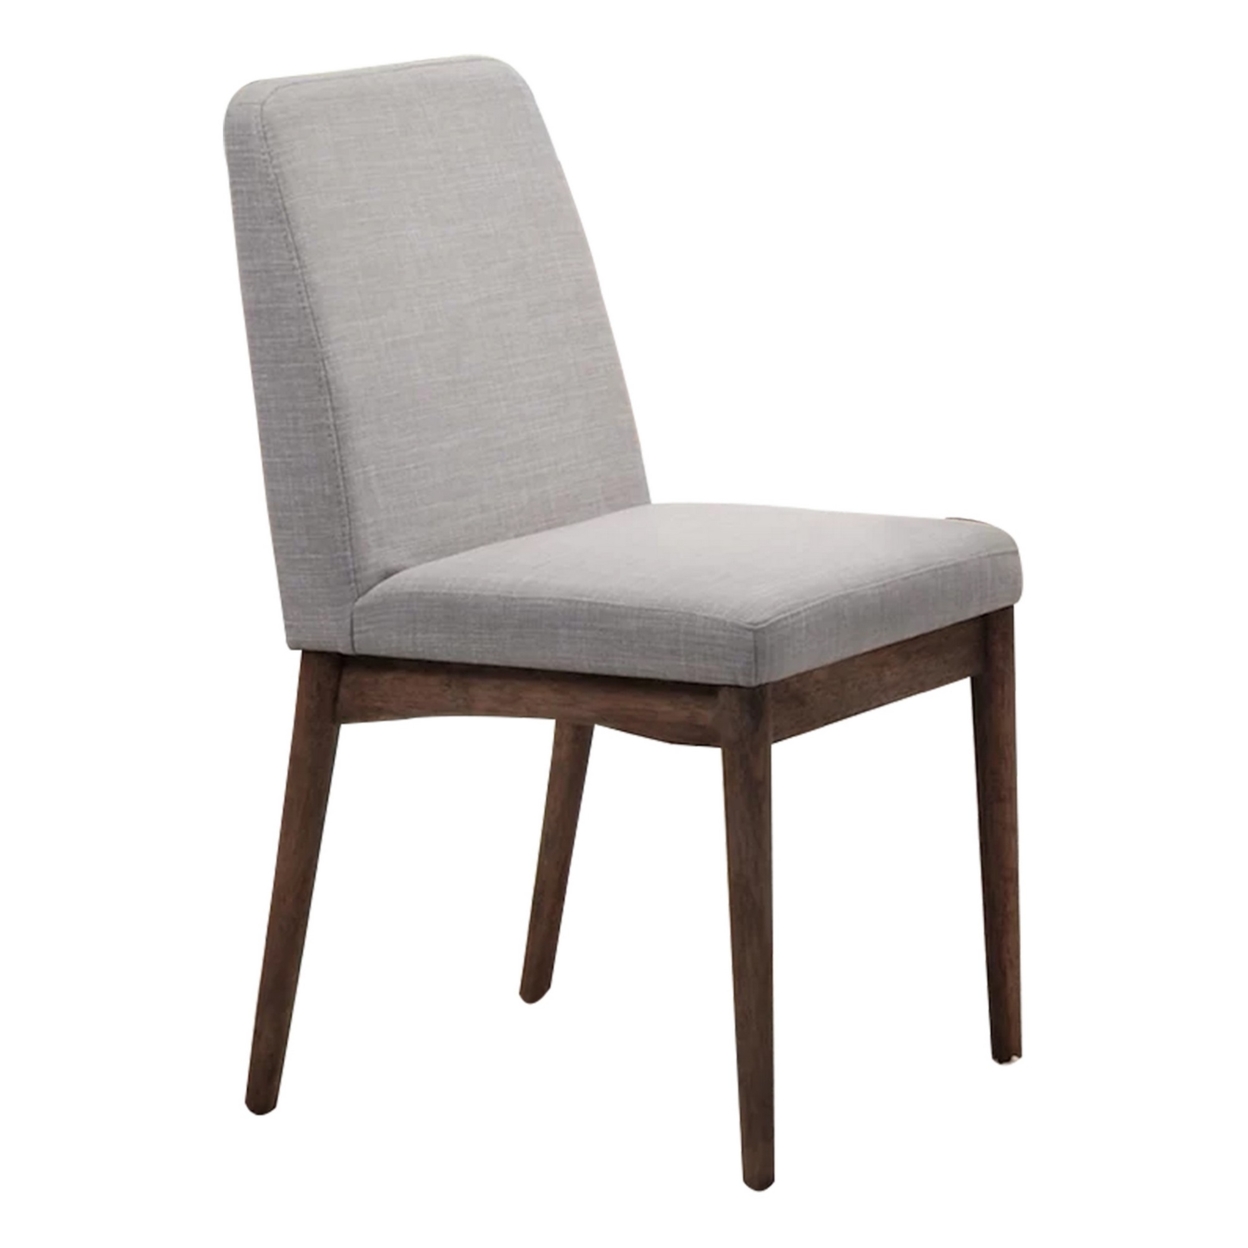 Lee Set Of 2 Modern Wood Dining Chairs, Cushioned Seats, Tapered Legs, Gray